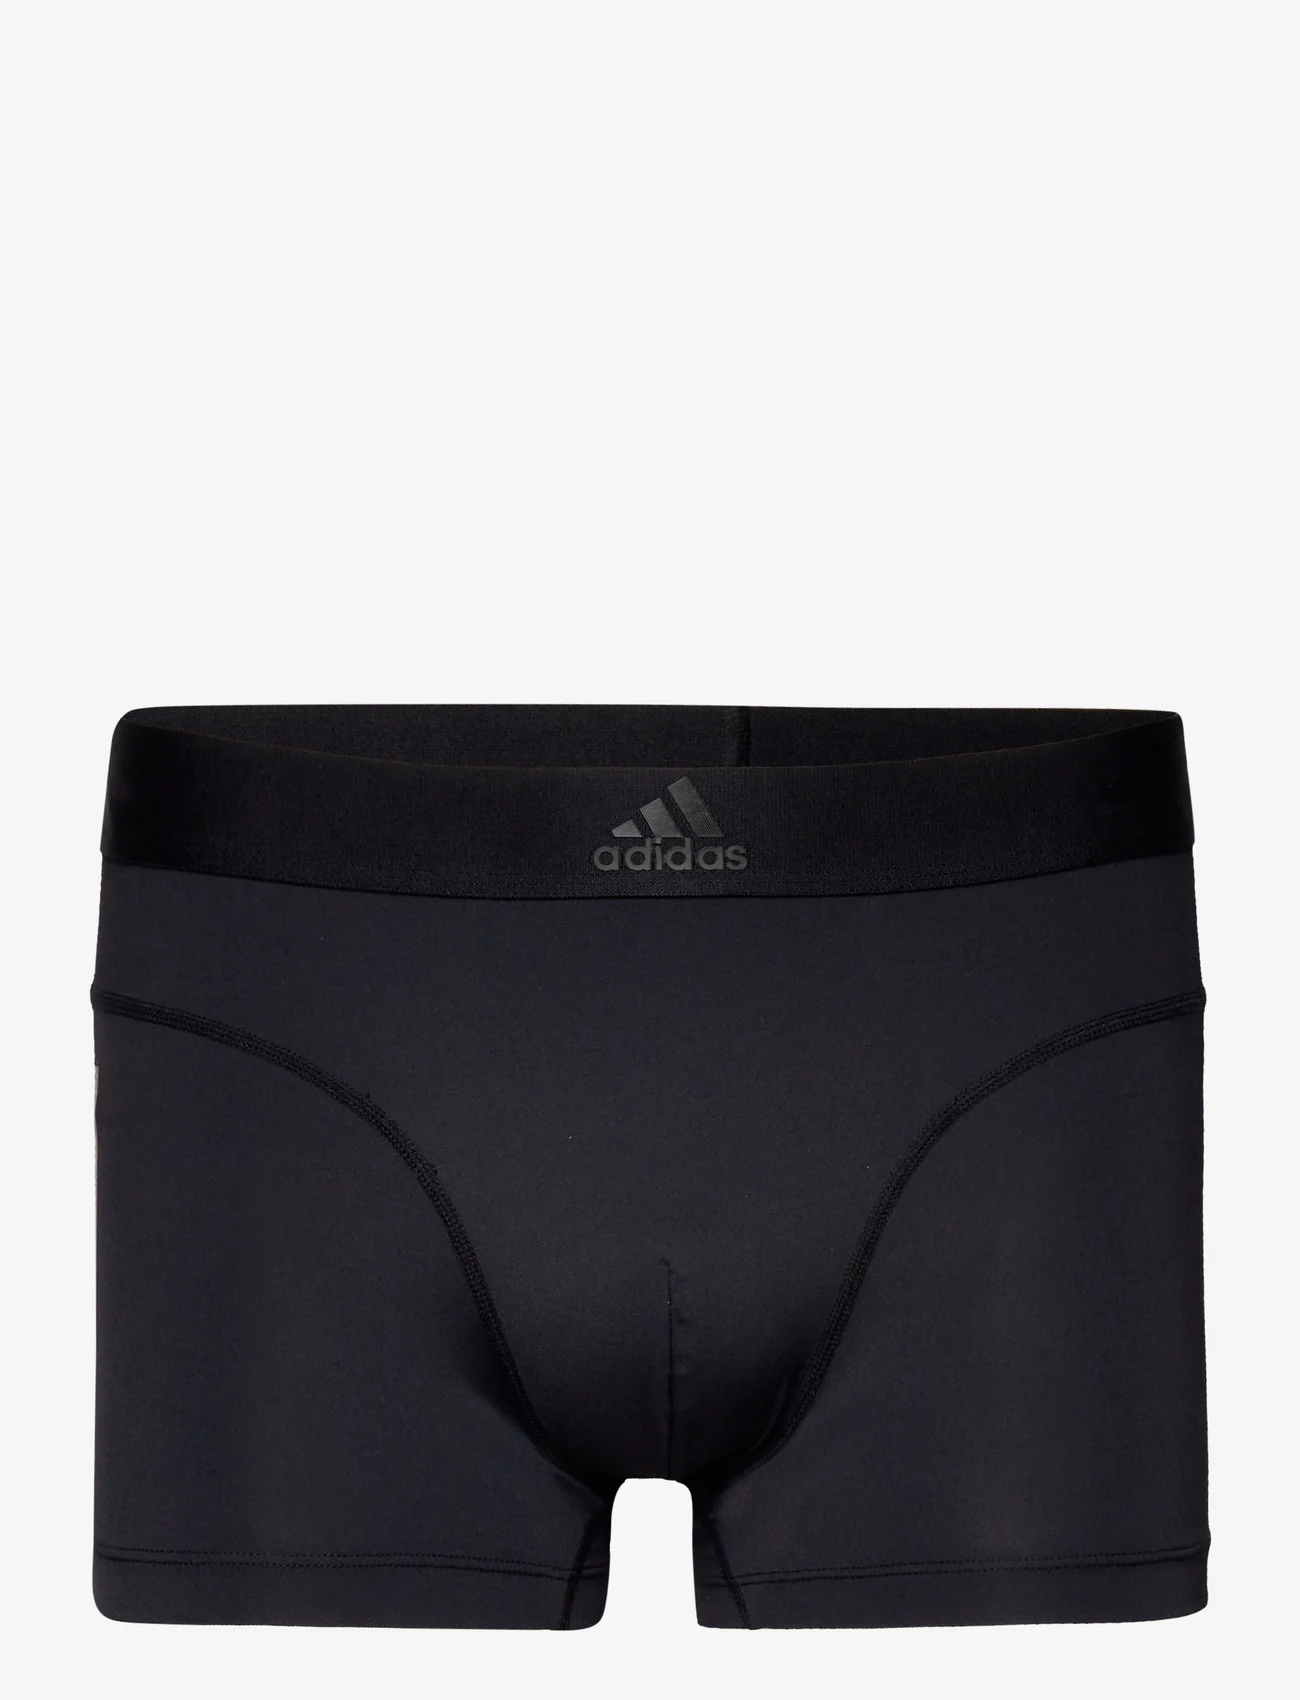 adidas Underwear Trunks (Black), (20.25 €) | Large selection of outlet ...